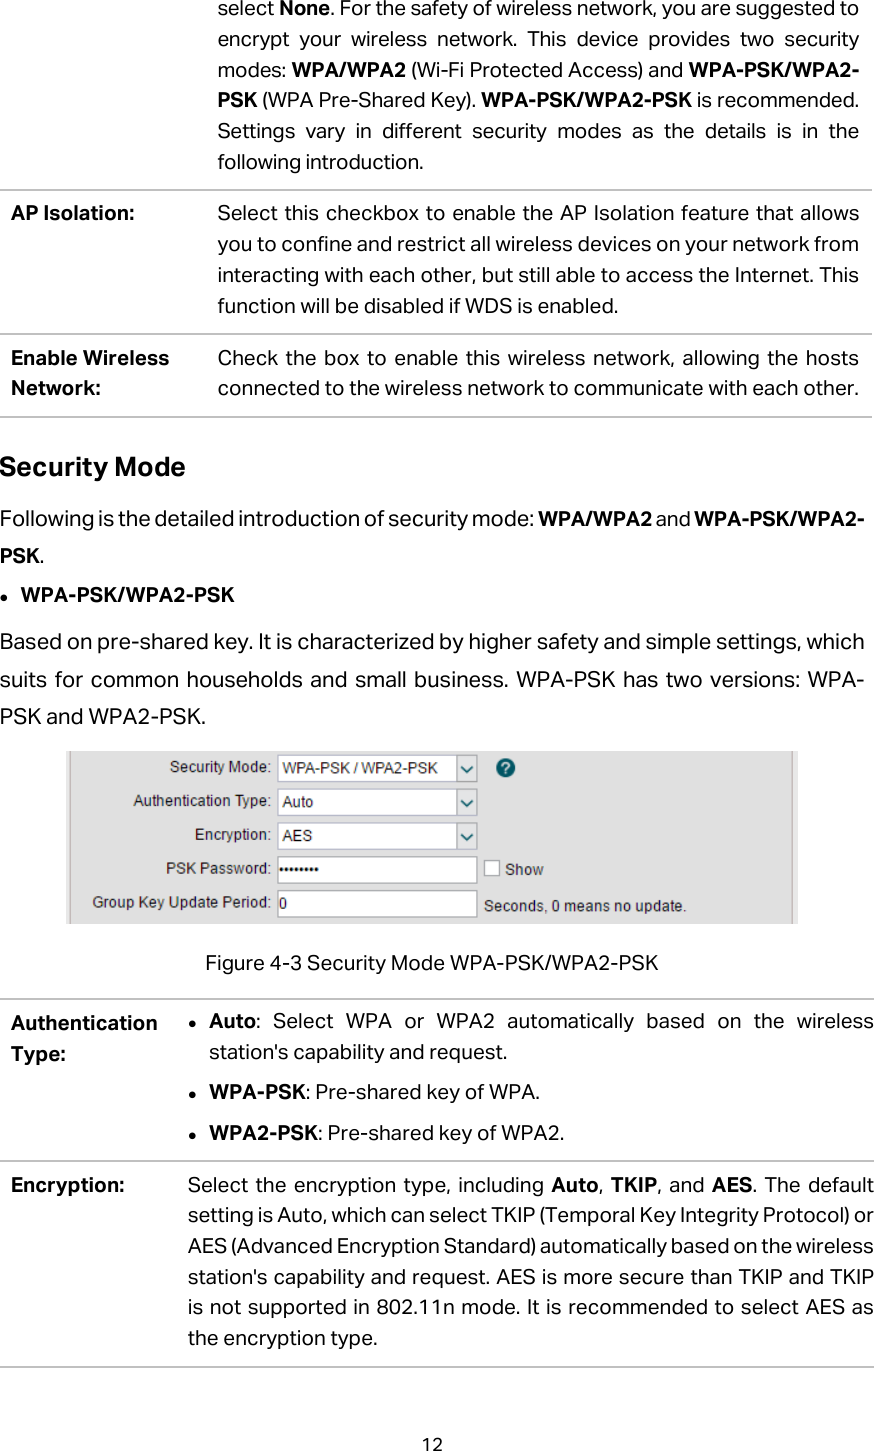 select None. For the safety of wireless network, you are suggested to encrypt your wireless network. This device provides two security modes: WPA/WPA2 (Wi-Fi Protected Access) and WPA-PSK/WPA2-PSK (WPA Pre-Shared Key). WPA-PSK/WPA2-PSK is recommended. Settings vary in different security modes as the details is in the following introduction.   AP Isolation: Select this checkbox to enable the AP Isolation feature that allows you to confine and restrict all wireless devices on your network from interacting with each other, but still able to access the Internet. This function will be disabled if WDS is enabled. Enable Wireless Network: Check the box to enable this wireless network, allowing the hosts connected to the wireless network to communicate with each other. Security Mode Following is the detailed introduction of security mode: WPA/WPA2 and WPA-PSK/WPA2-PSK.  WPA-PSK/WPA2-PSK Based on pre-shared key. It is characterized by higher safety and simple settings, which suits for common households and small business. WPA-PSK has two versions: WPA-PSK and WPA2-PSK.    Figure 4-3 Security Mode WPA-PSK/WPA2-PSK Authentication Type:  Auto: Select WPA or WPA2 automatically based on the wireless station&apos;s capability and request.  WPA-PSK: Pre-shared key of WPA.  WPA2-PSK: Pre-shared key of WPA2. Encryption: Select the encryption type, including Auto,  TKIP, and AES. The default setting is Auto, which can select TKIP (Temporal Key Integrity Protocol) or AES (Advanced Encryption Standard) automatically based on the wireless station&apos;s capability and request. AES is more secure than TKIP and TKIP is not supported in 802.11n mode. It is recommended to select AES as the encryption type. 12  